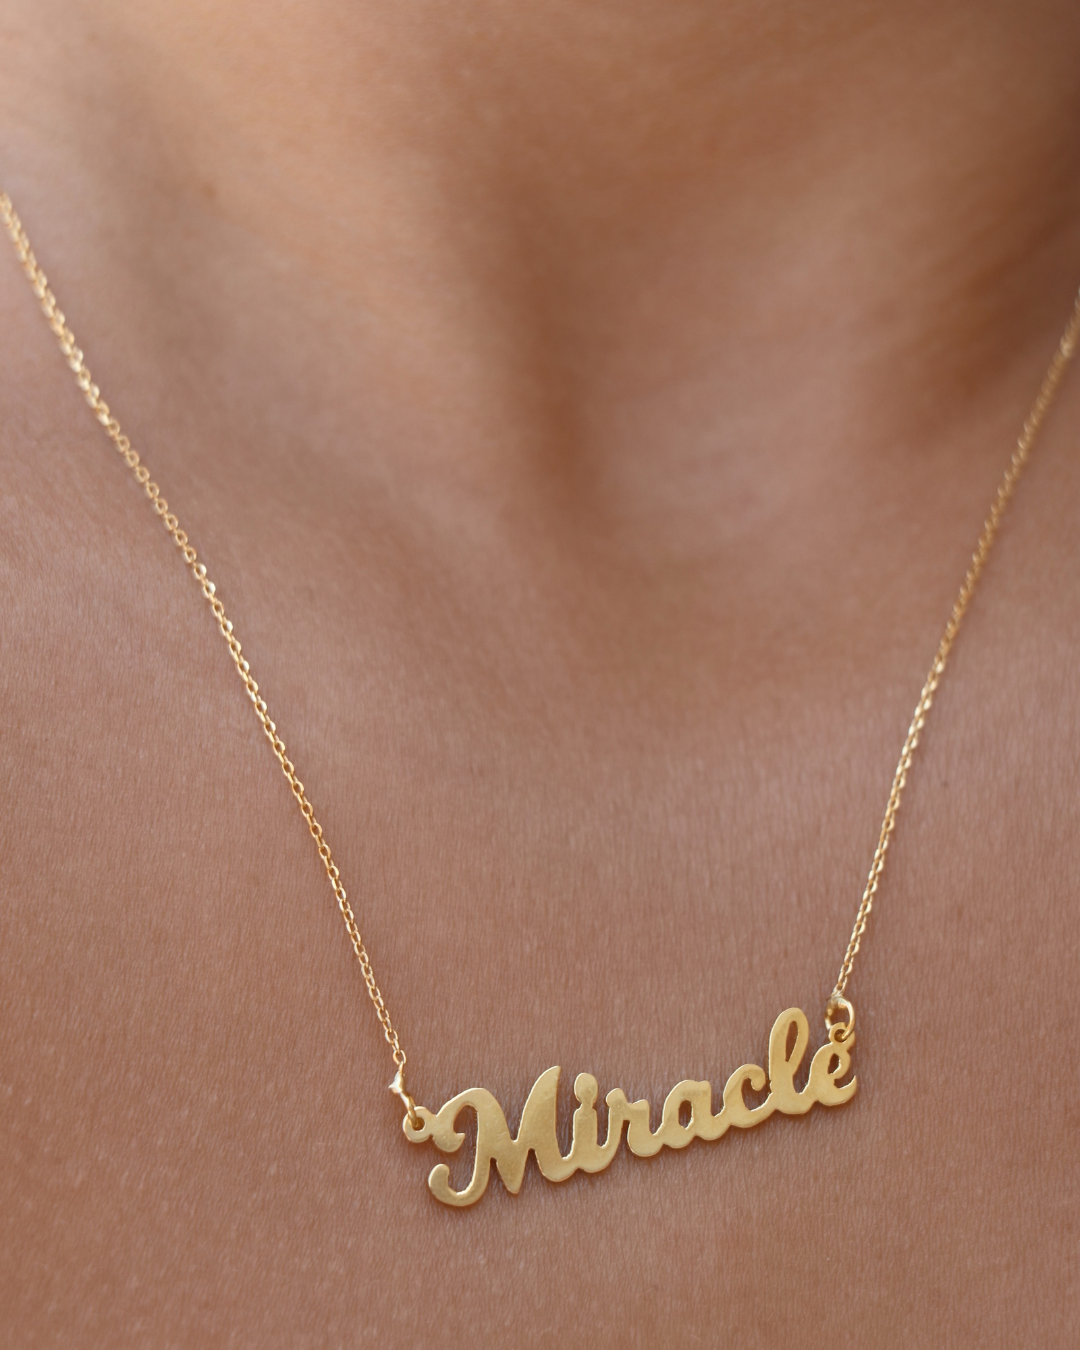 Miracle Necklace